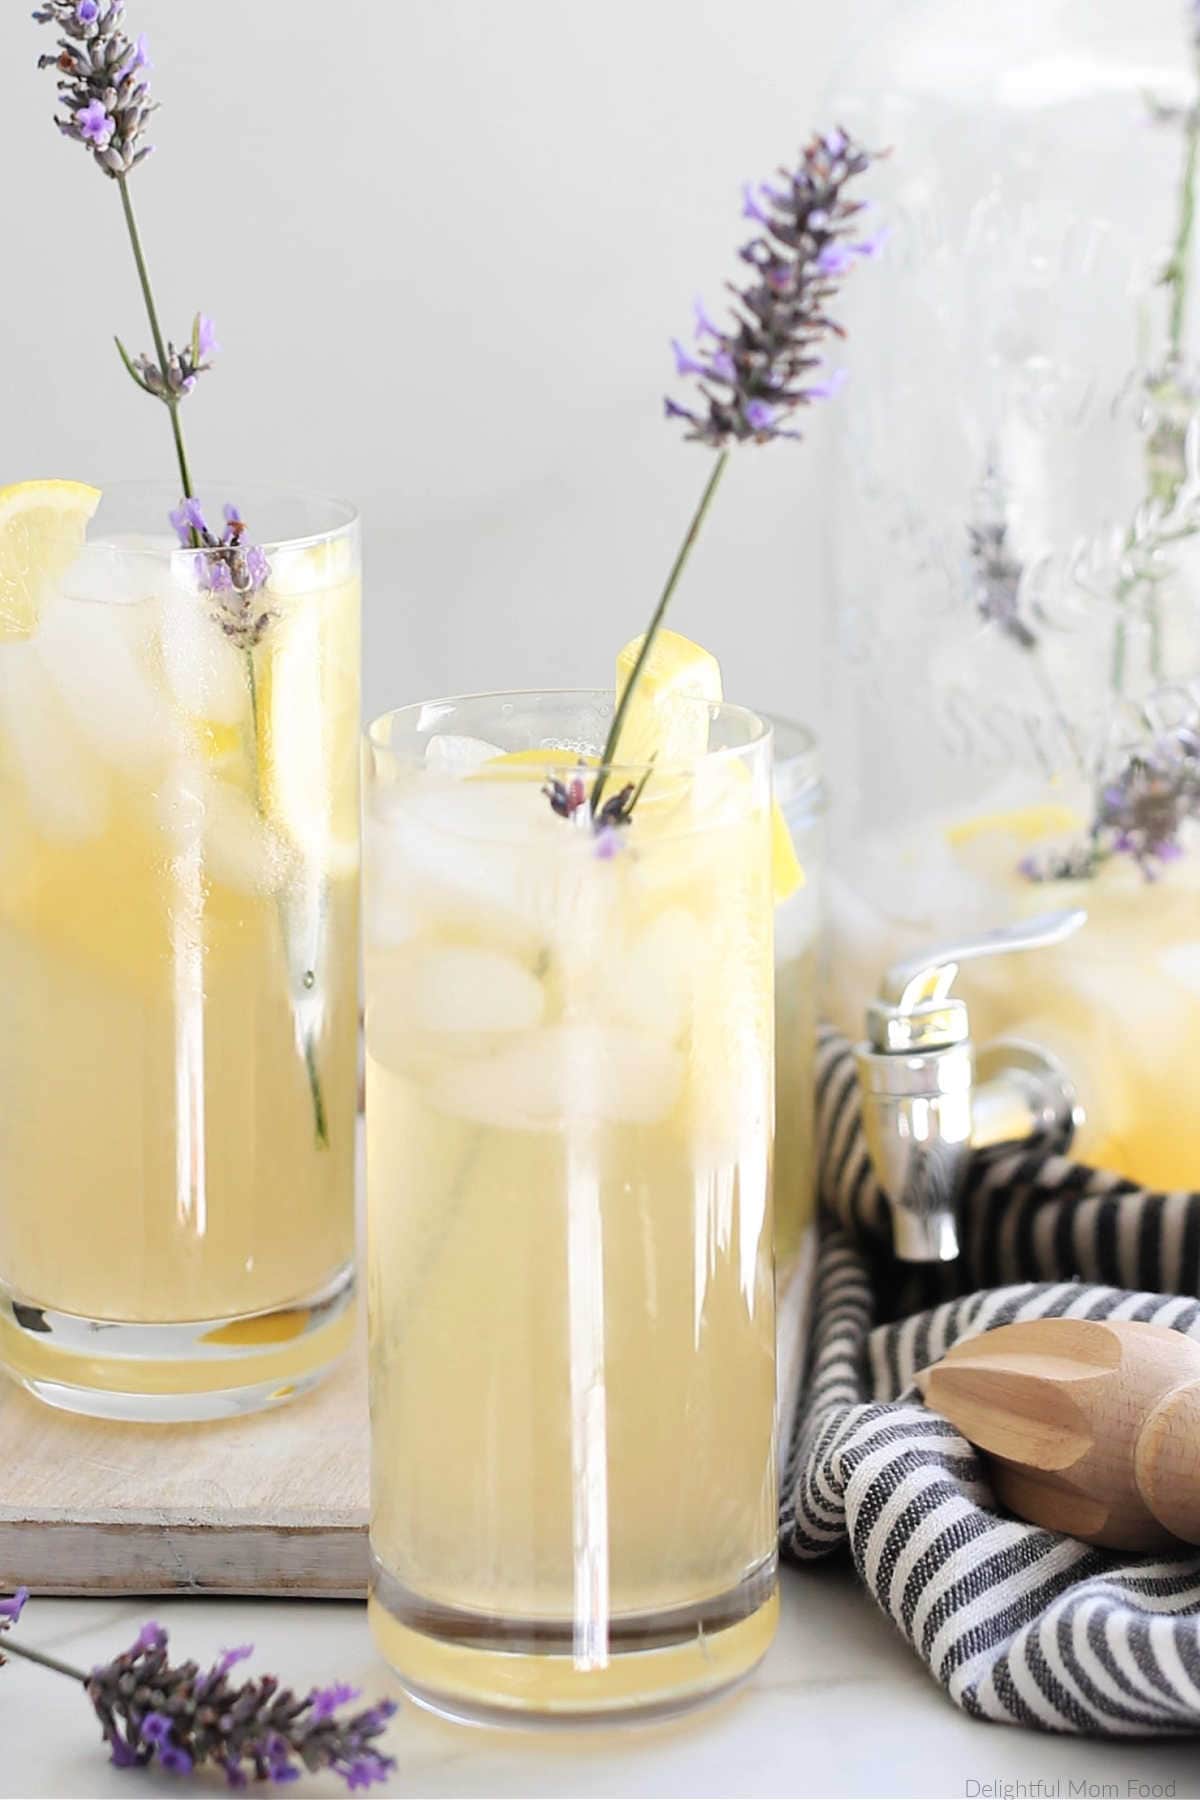 two glasses with lavender infused lemonade garnished with lavender stems and lemon slices